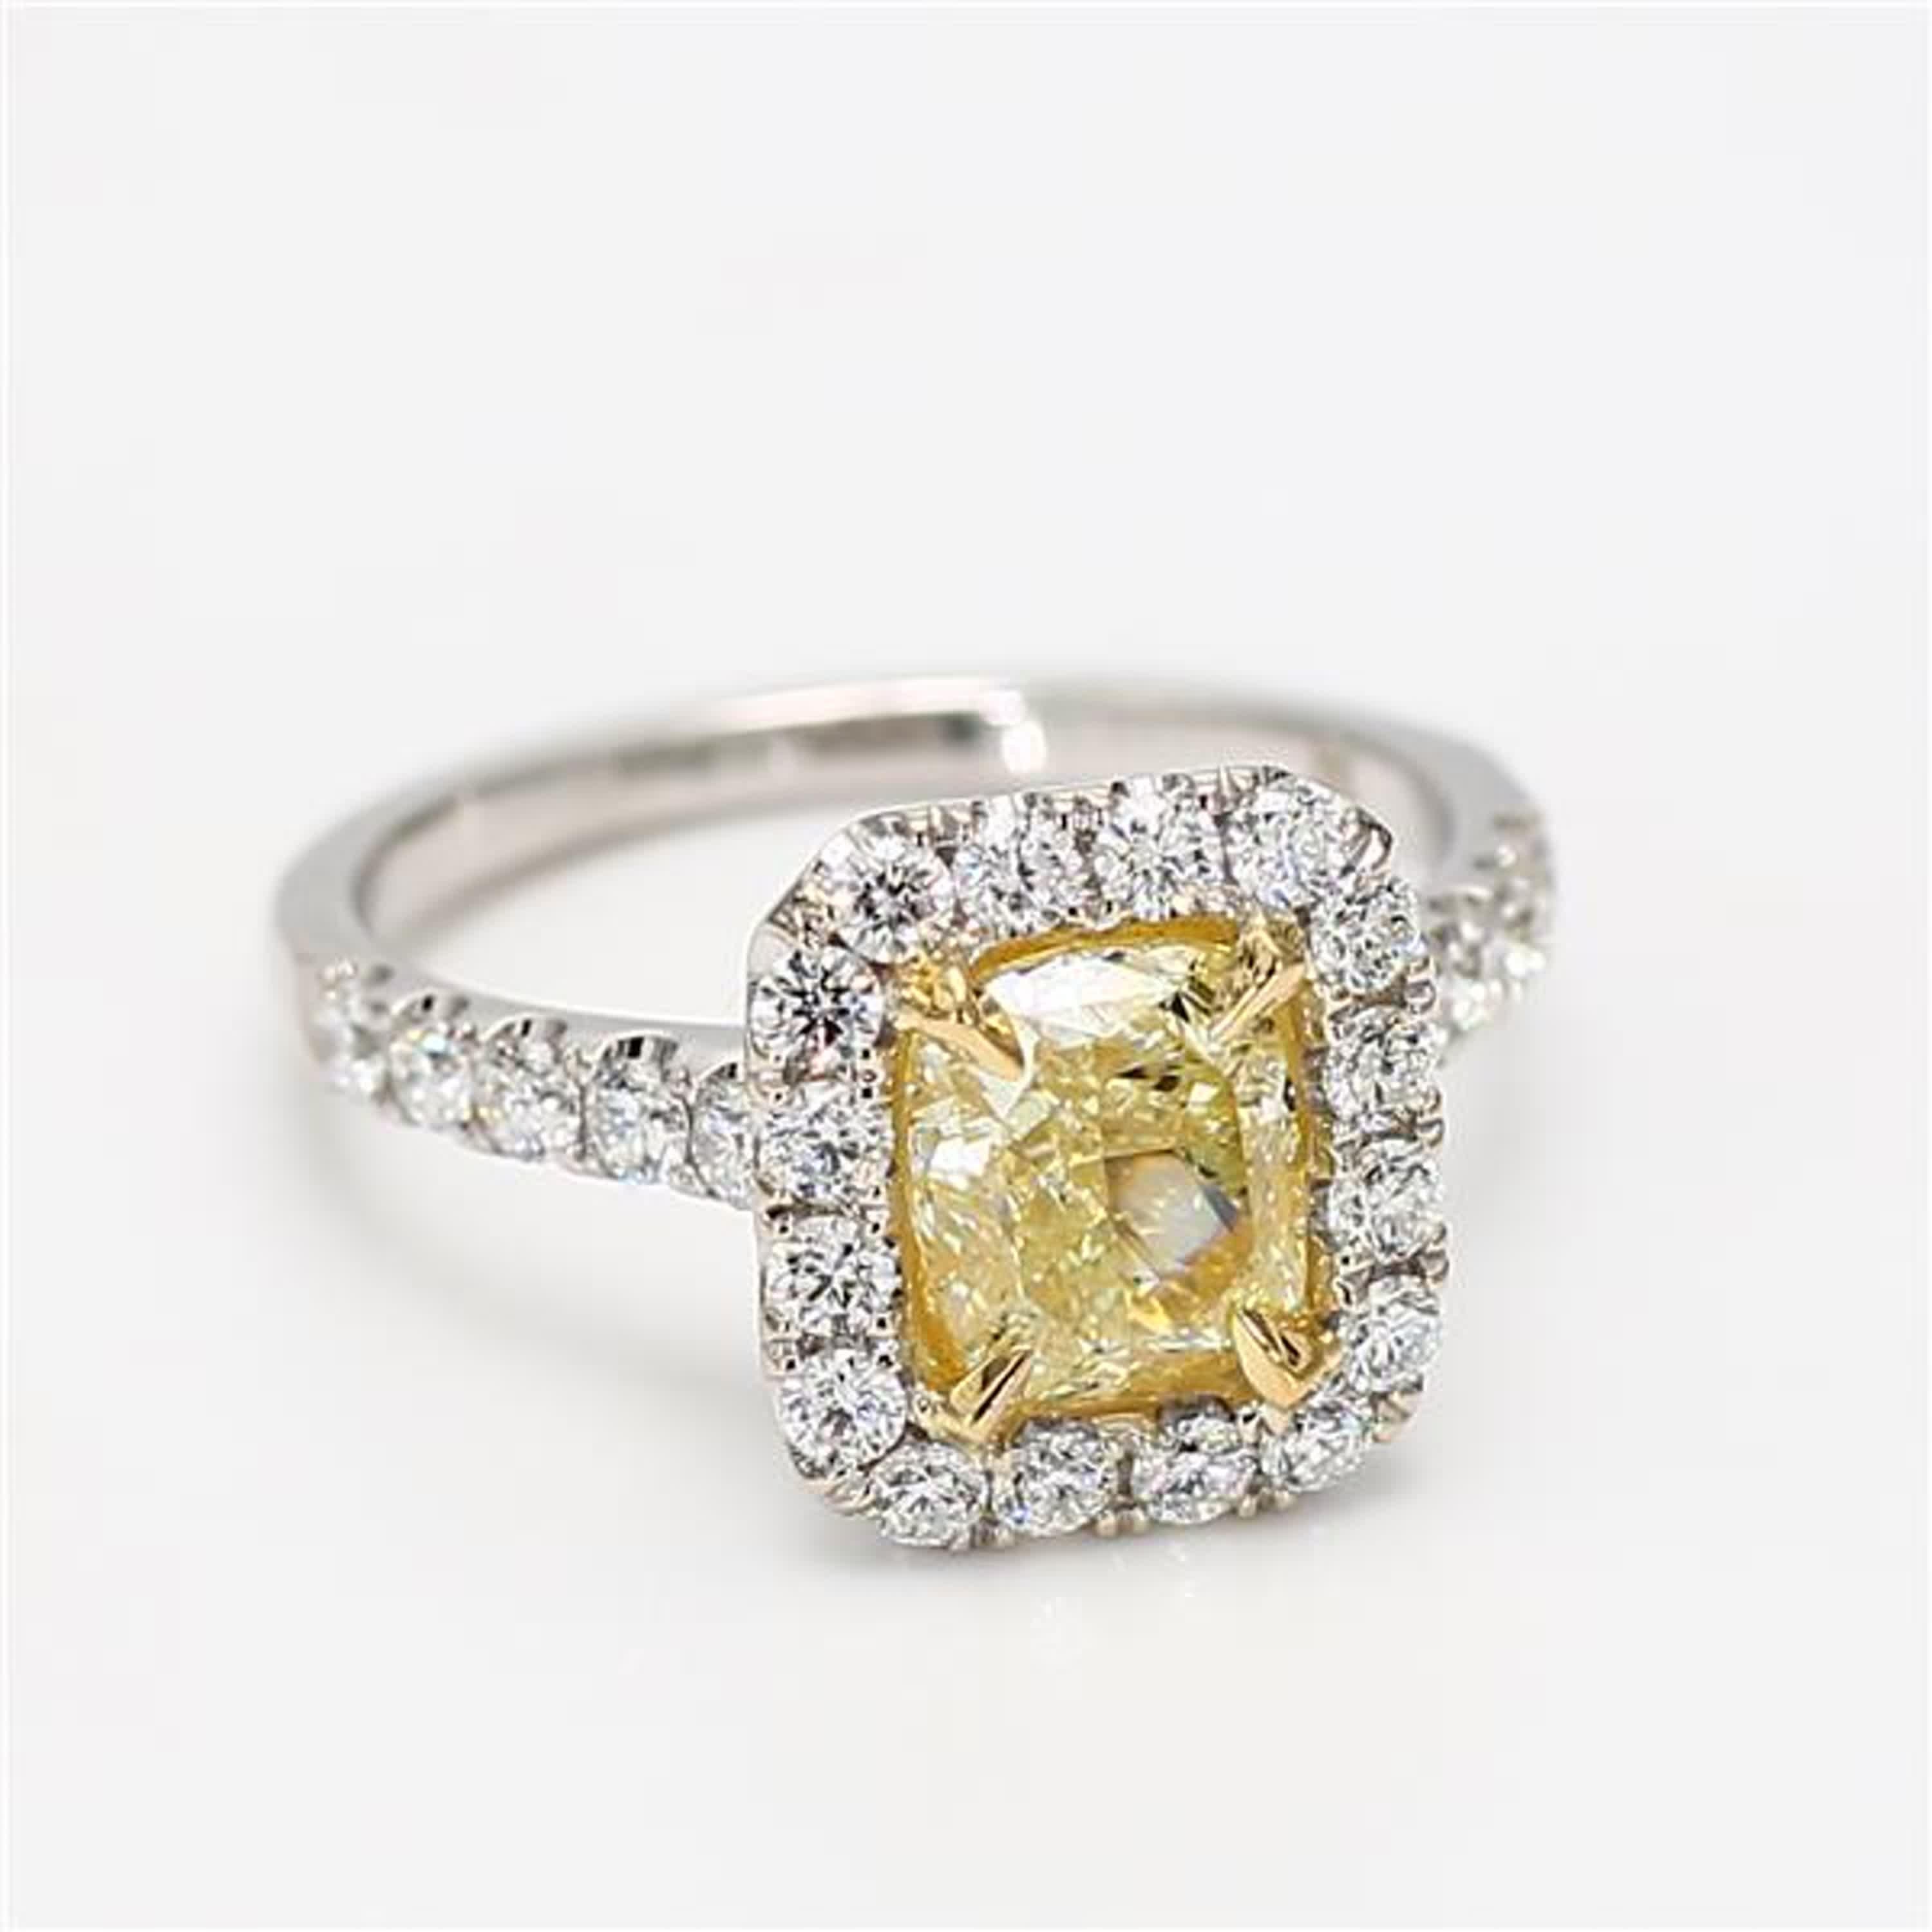 Natural Yellow Cushion and White Diamond 2.42 Carat TW Gold Cocktail Ring For Sale 1